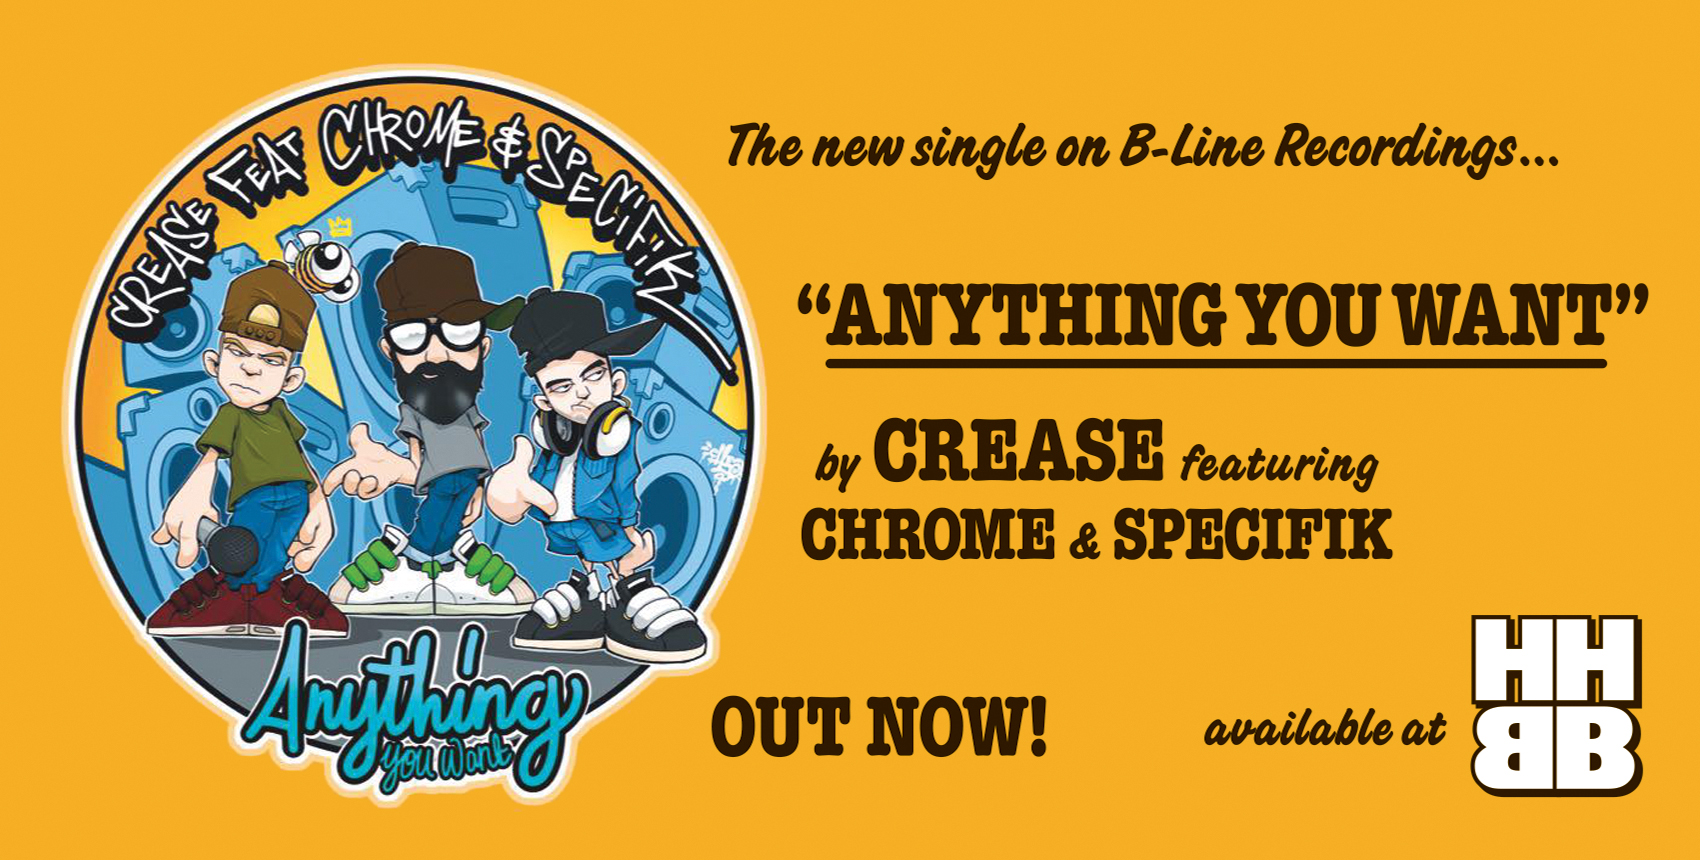 Crease - Anything You Want 7" B-Line Recordings